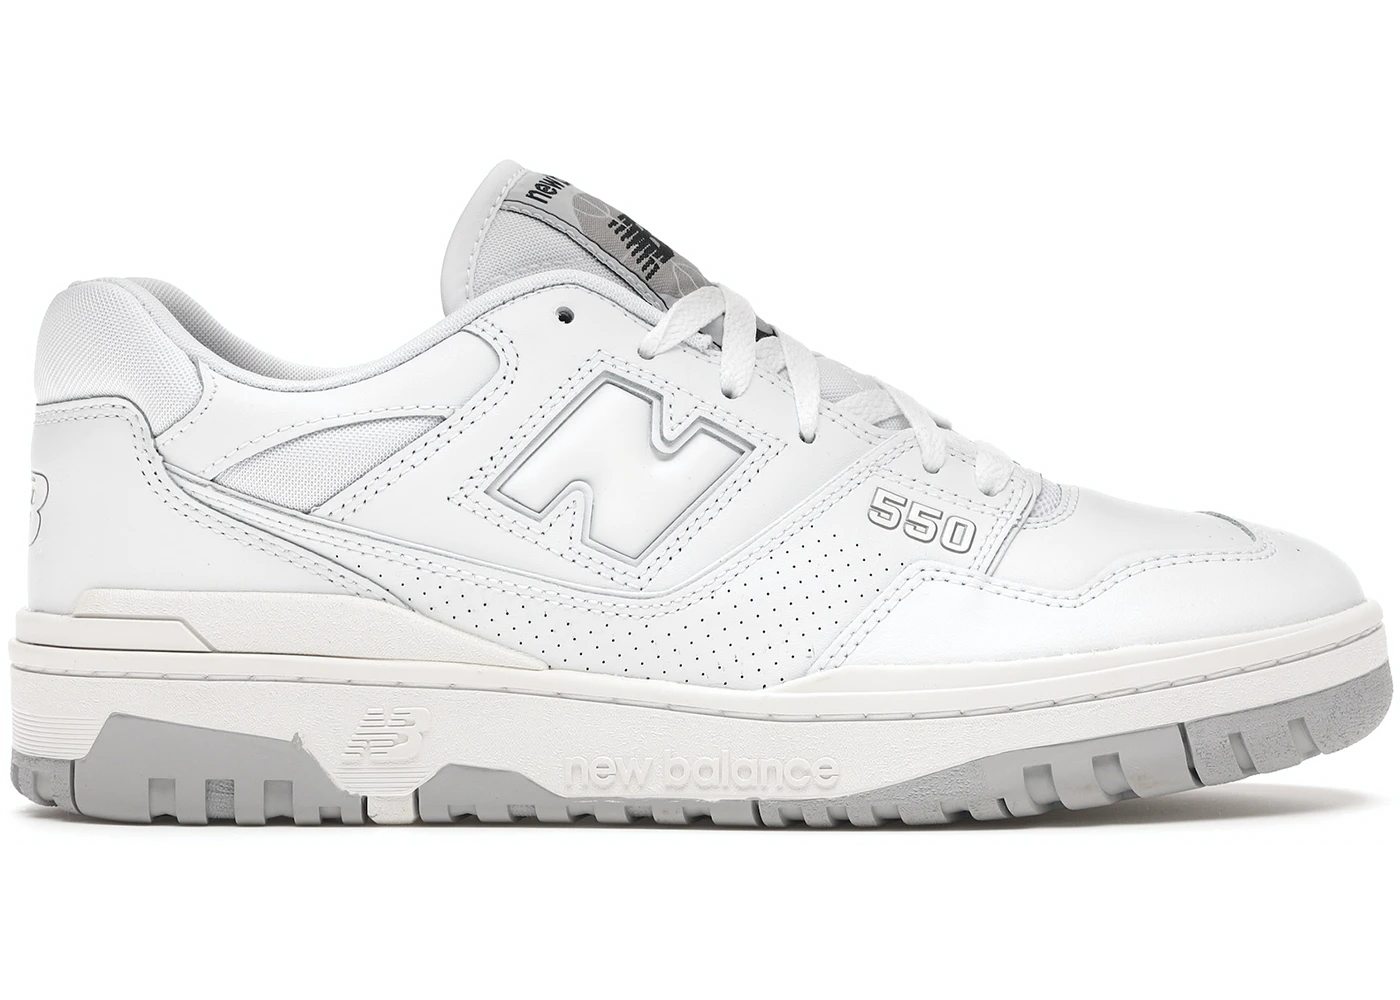 new balance white grey 550 collection lead